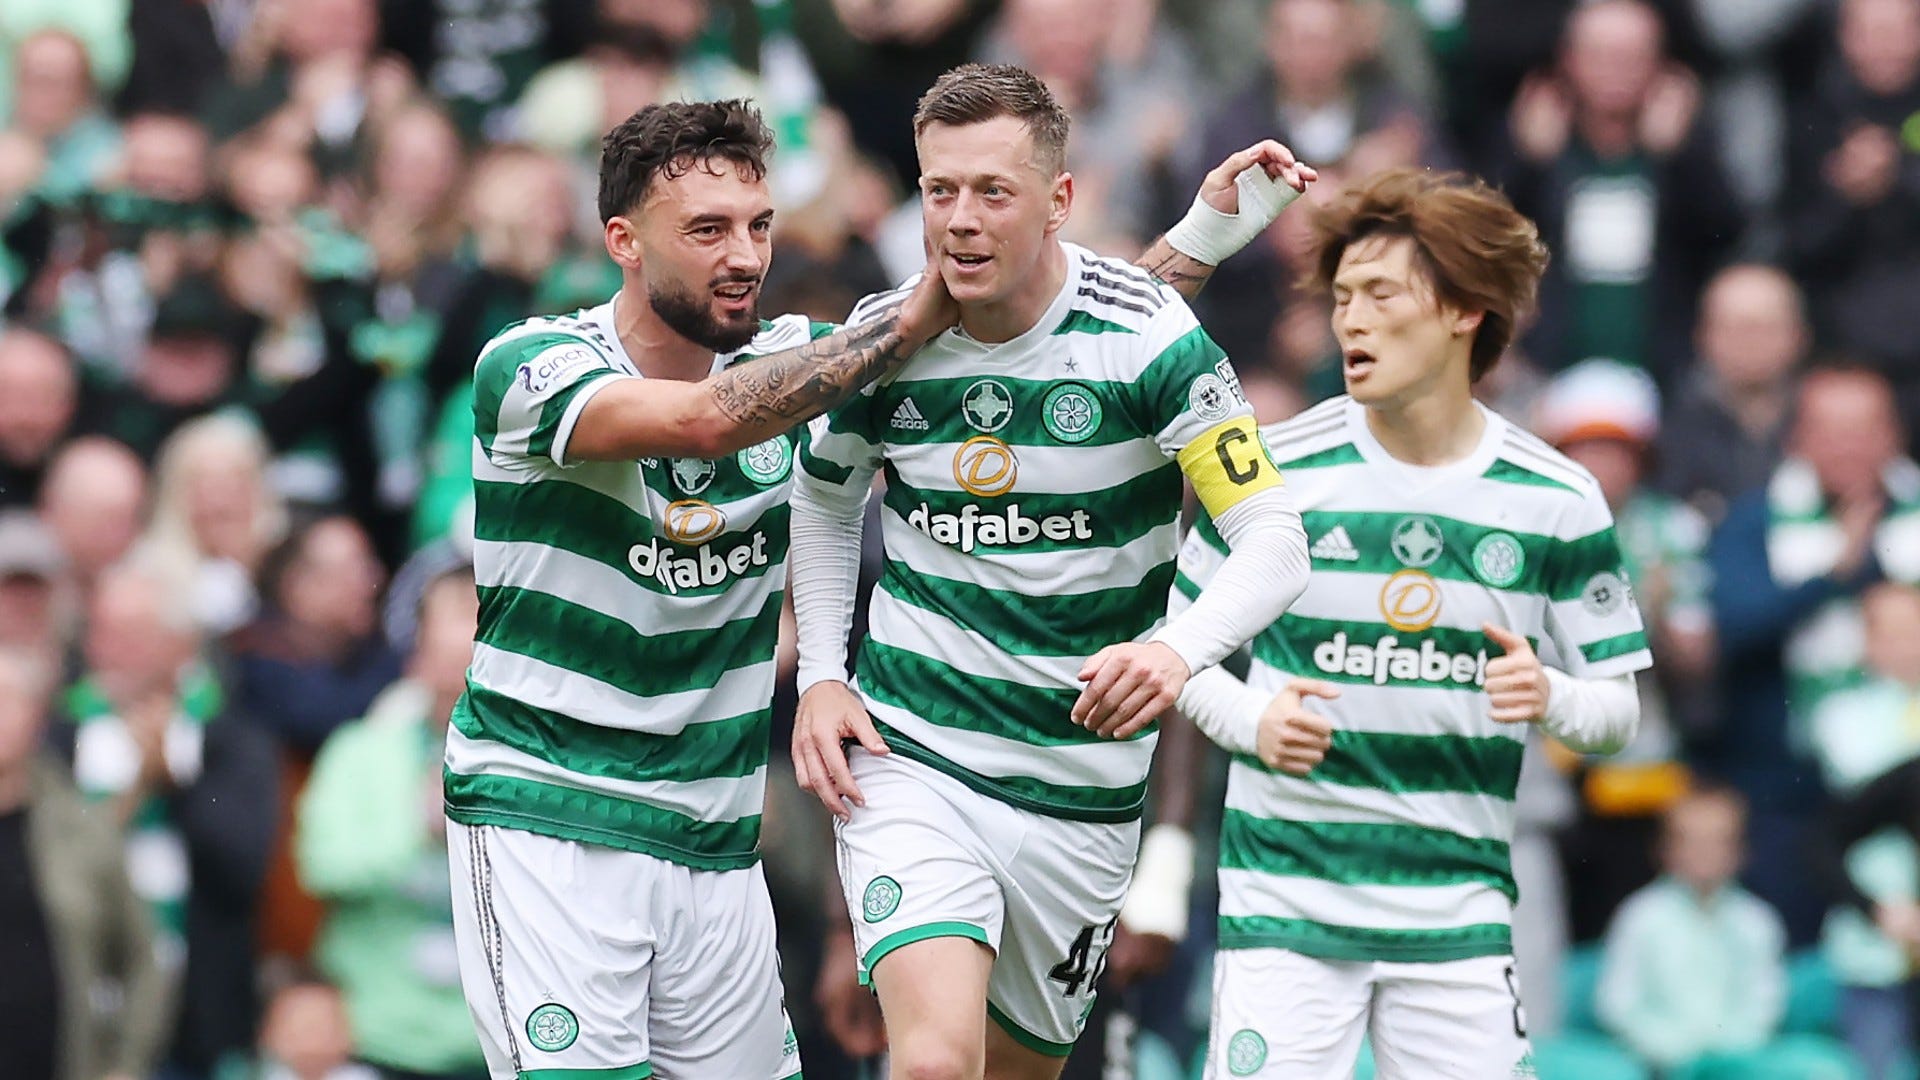 Hibernian vs Celtic Live stream, TV channel, kick-off time and where to watch Goal UK